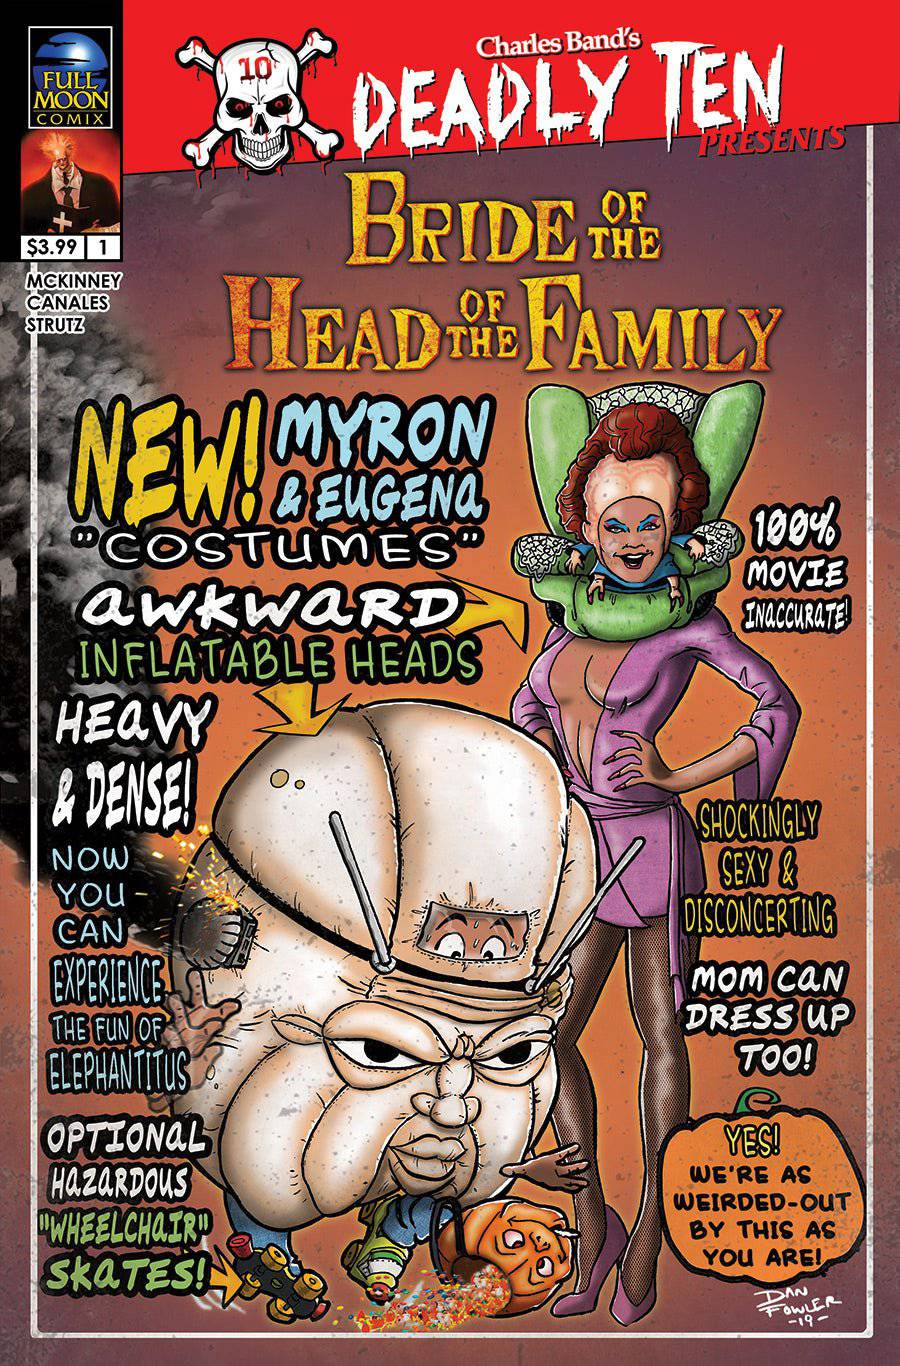 Deadly Ten Presents #6: Bride Of The Head Of The Family (Dan Fowler)